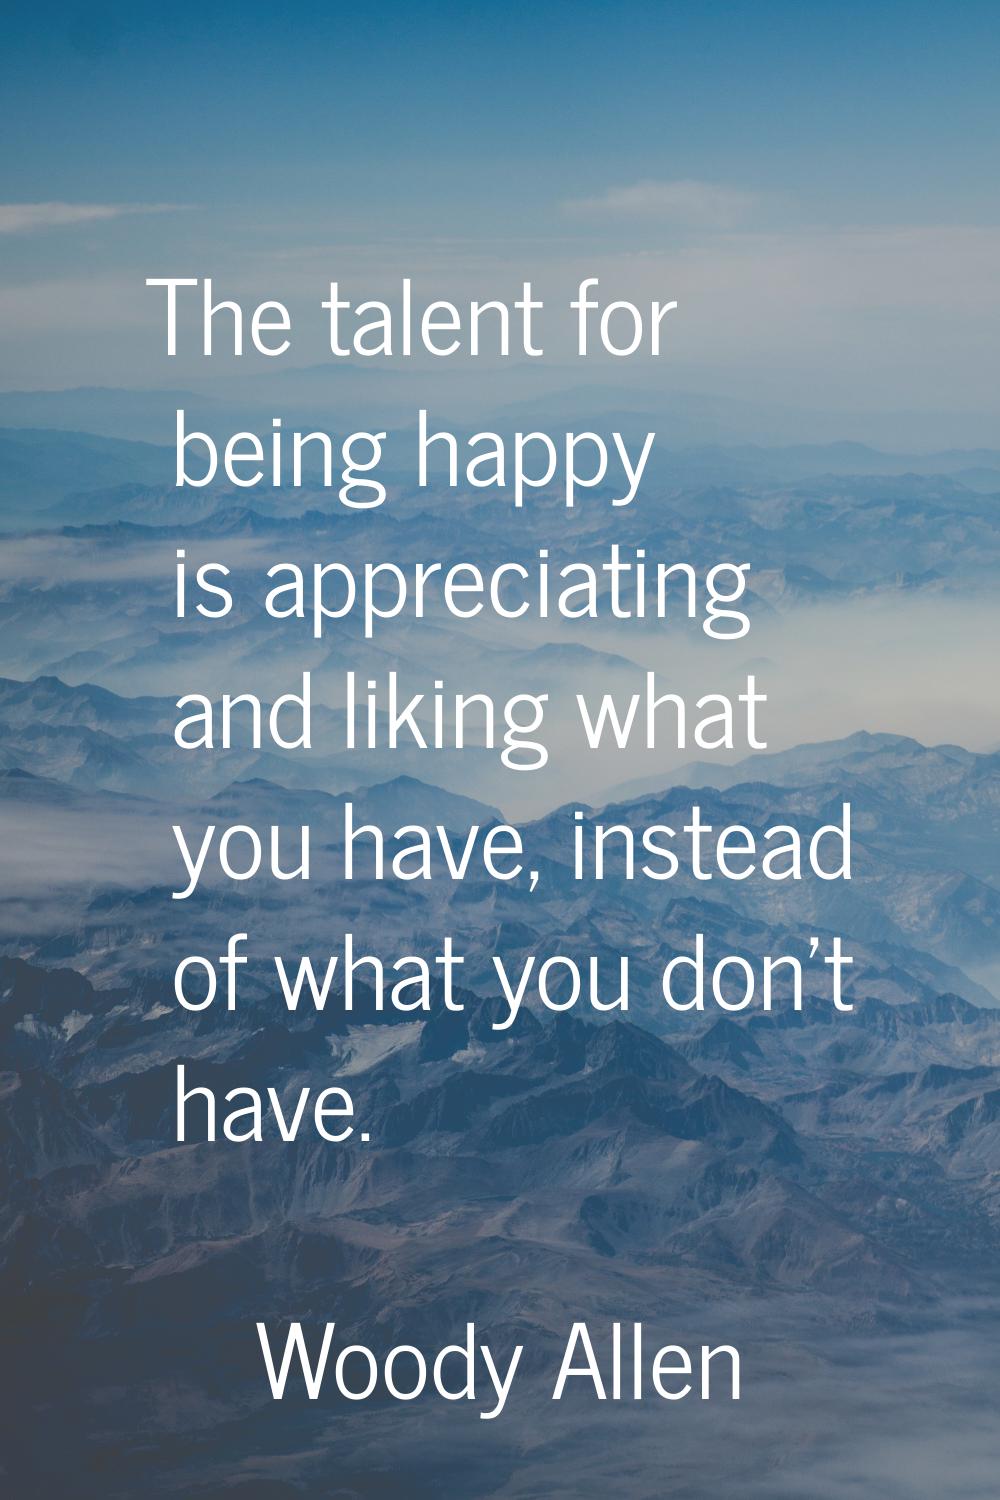 The talent for being happy is appreciating and liking what you have, instead of what you don't have